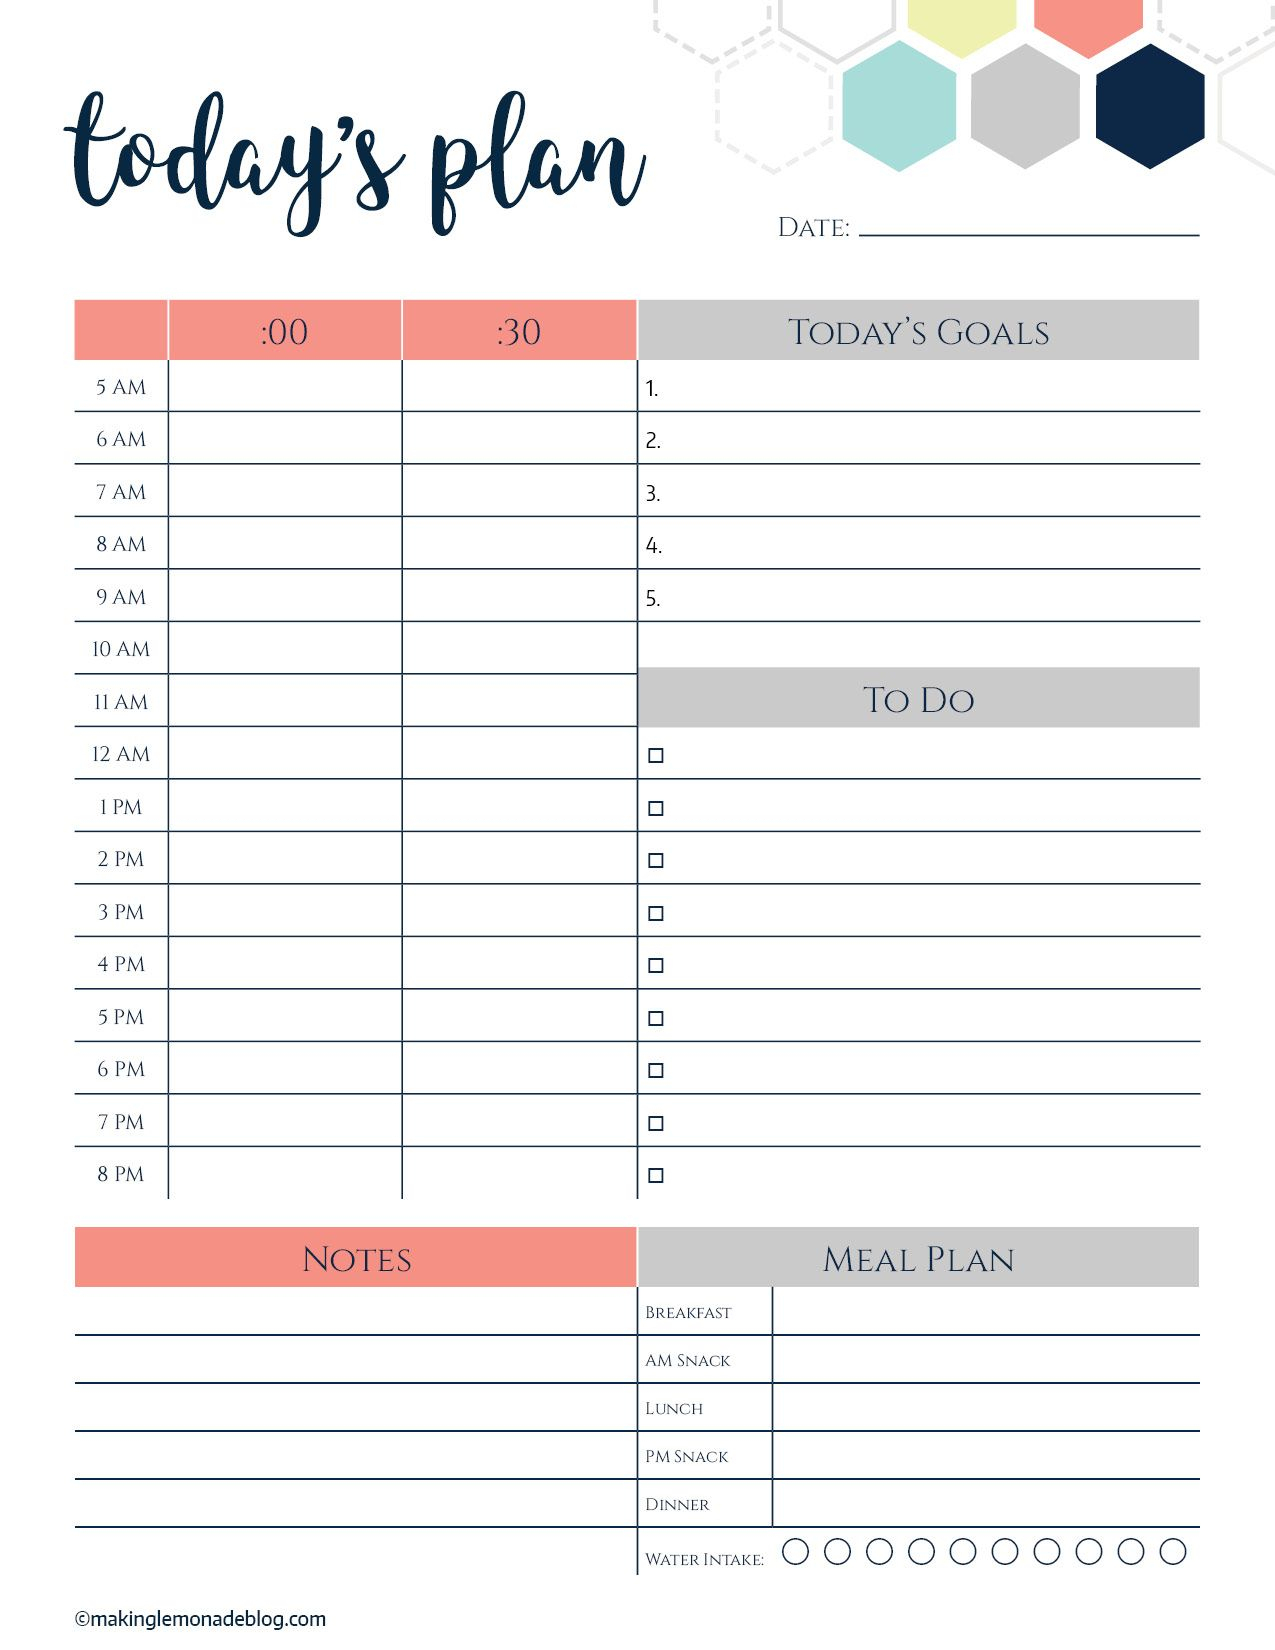 This Free Printable Daily Planner Changes Everything. Finally A Way - Planner Printable Free